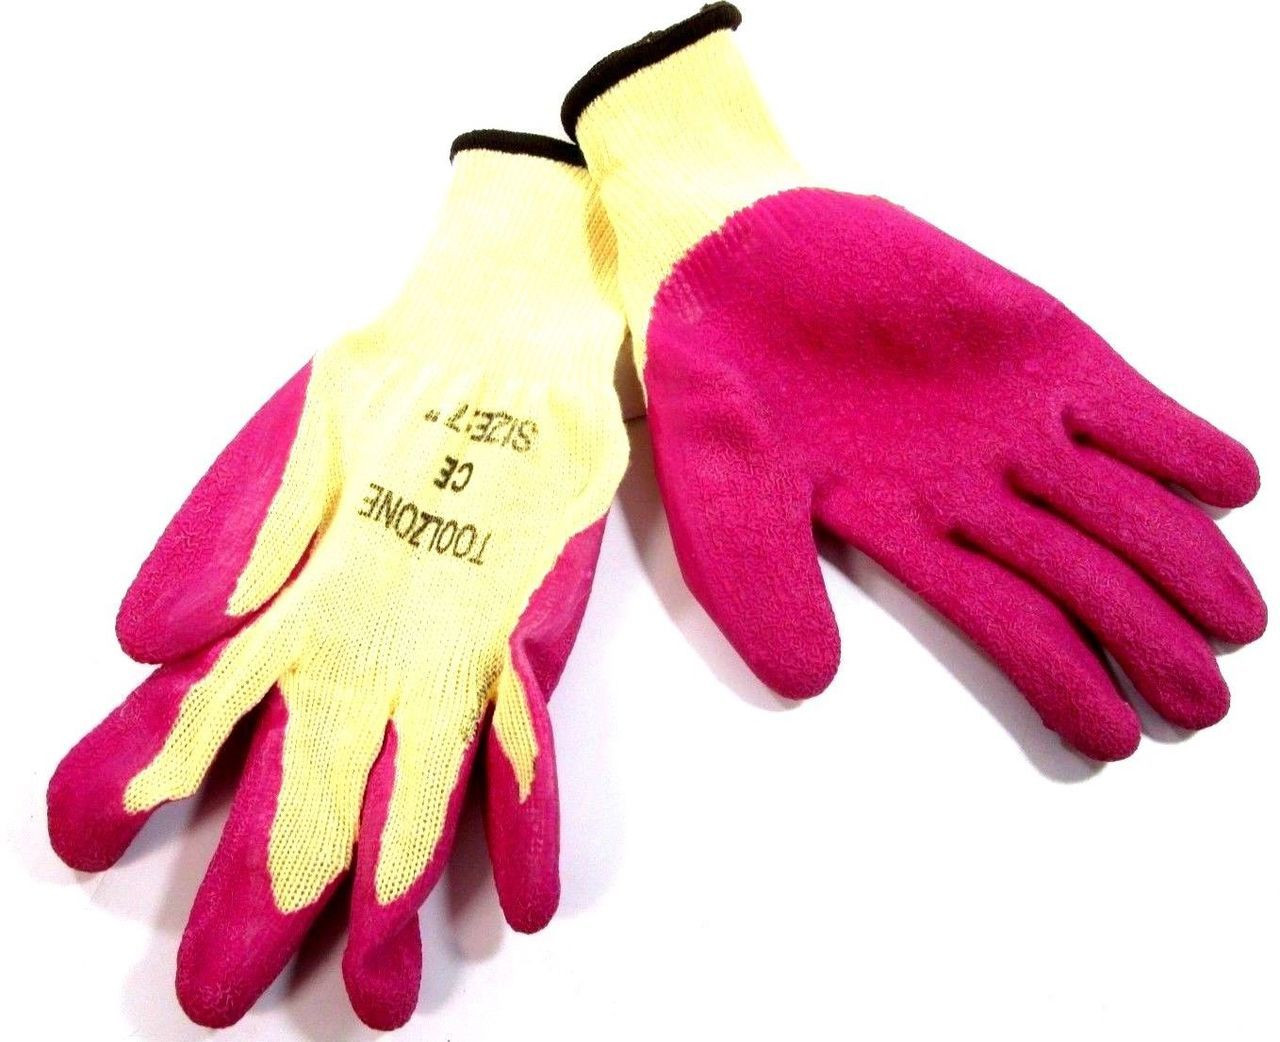 Ladies 7 " Ex Small Latex Dipped Gardening Work Gloves Pink GL037